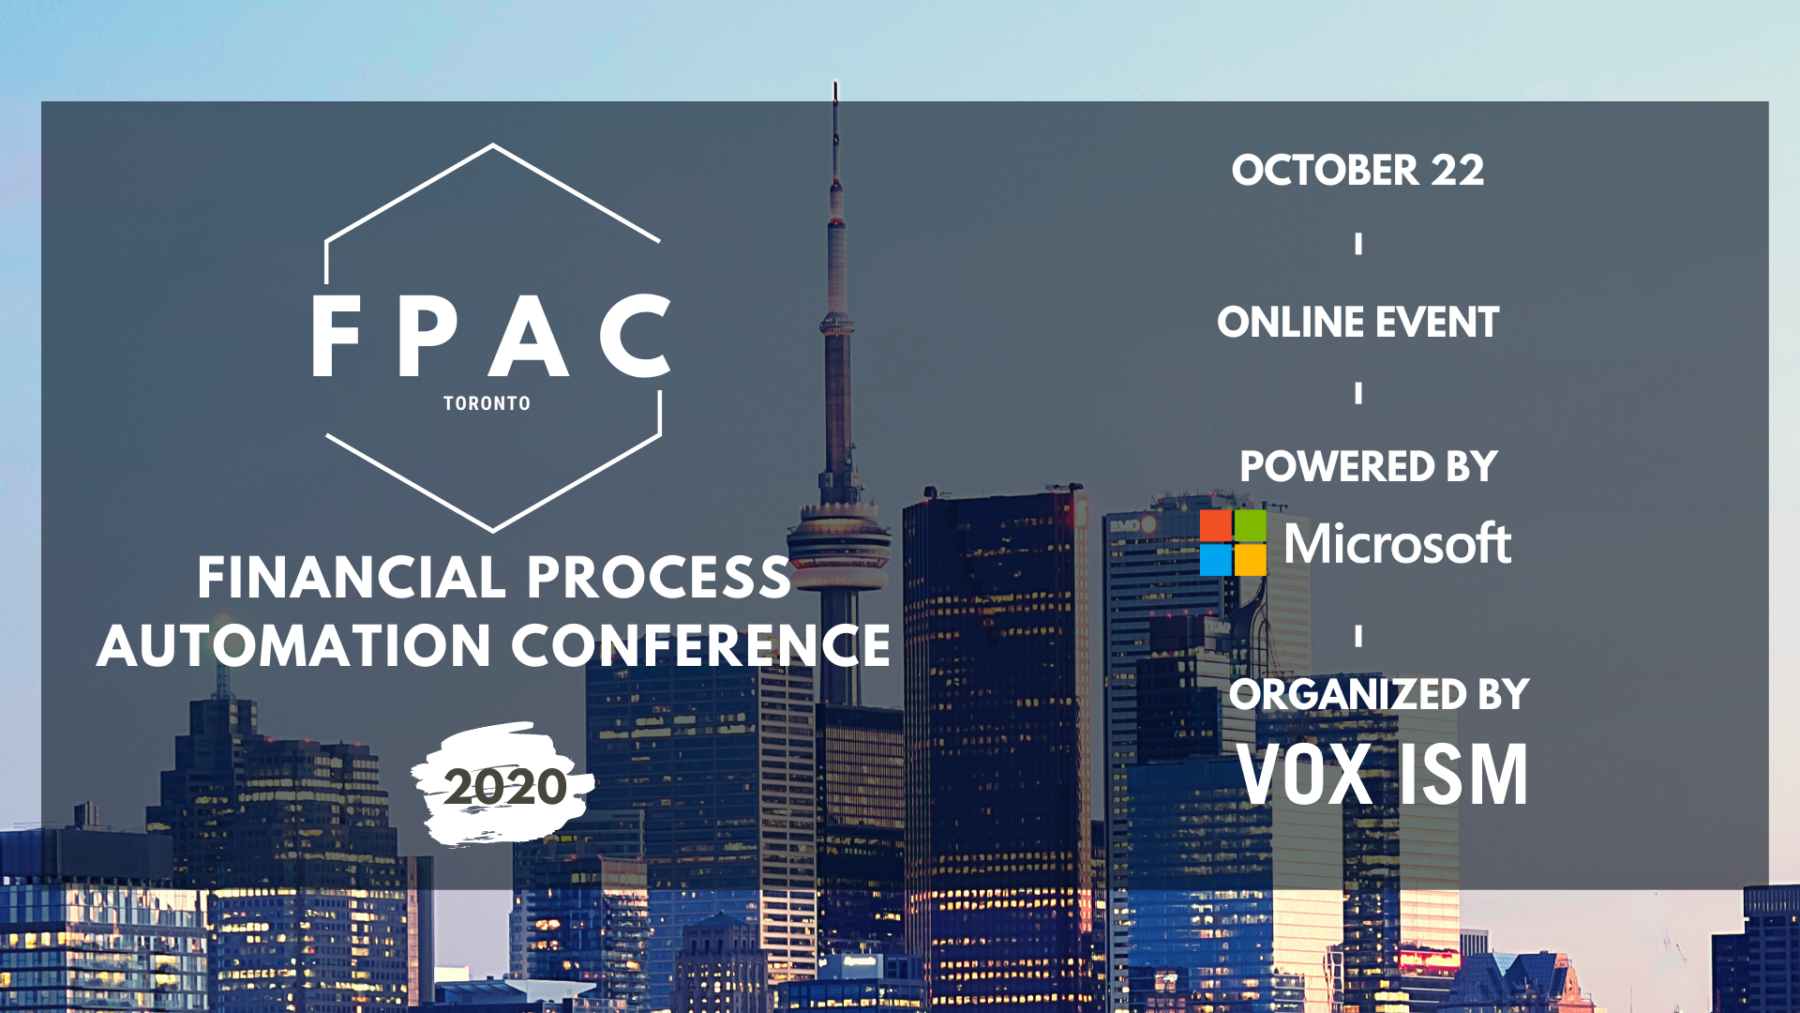 FPAC Fall 2020: Financial Process Automation Conference - October 22 - Online Event